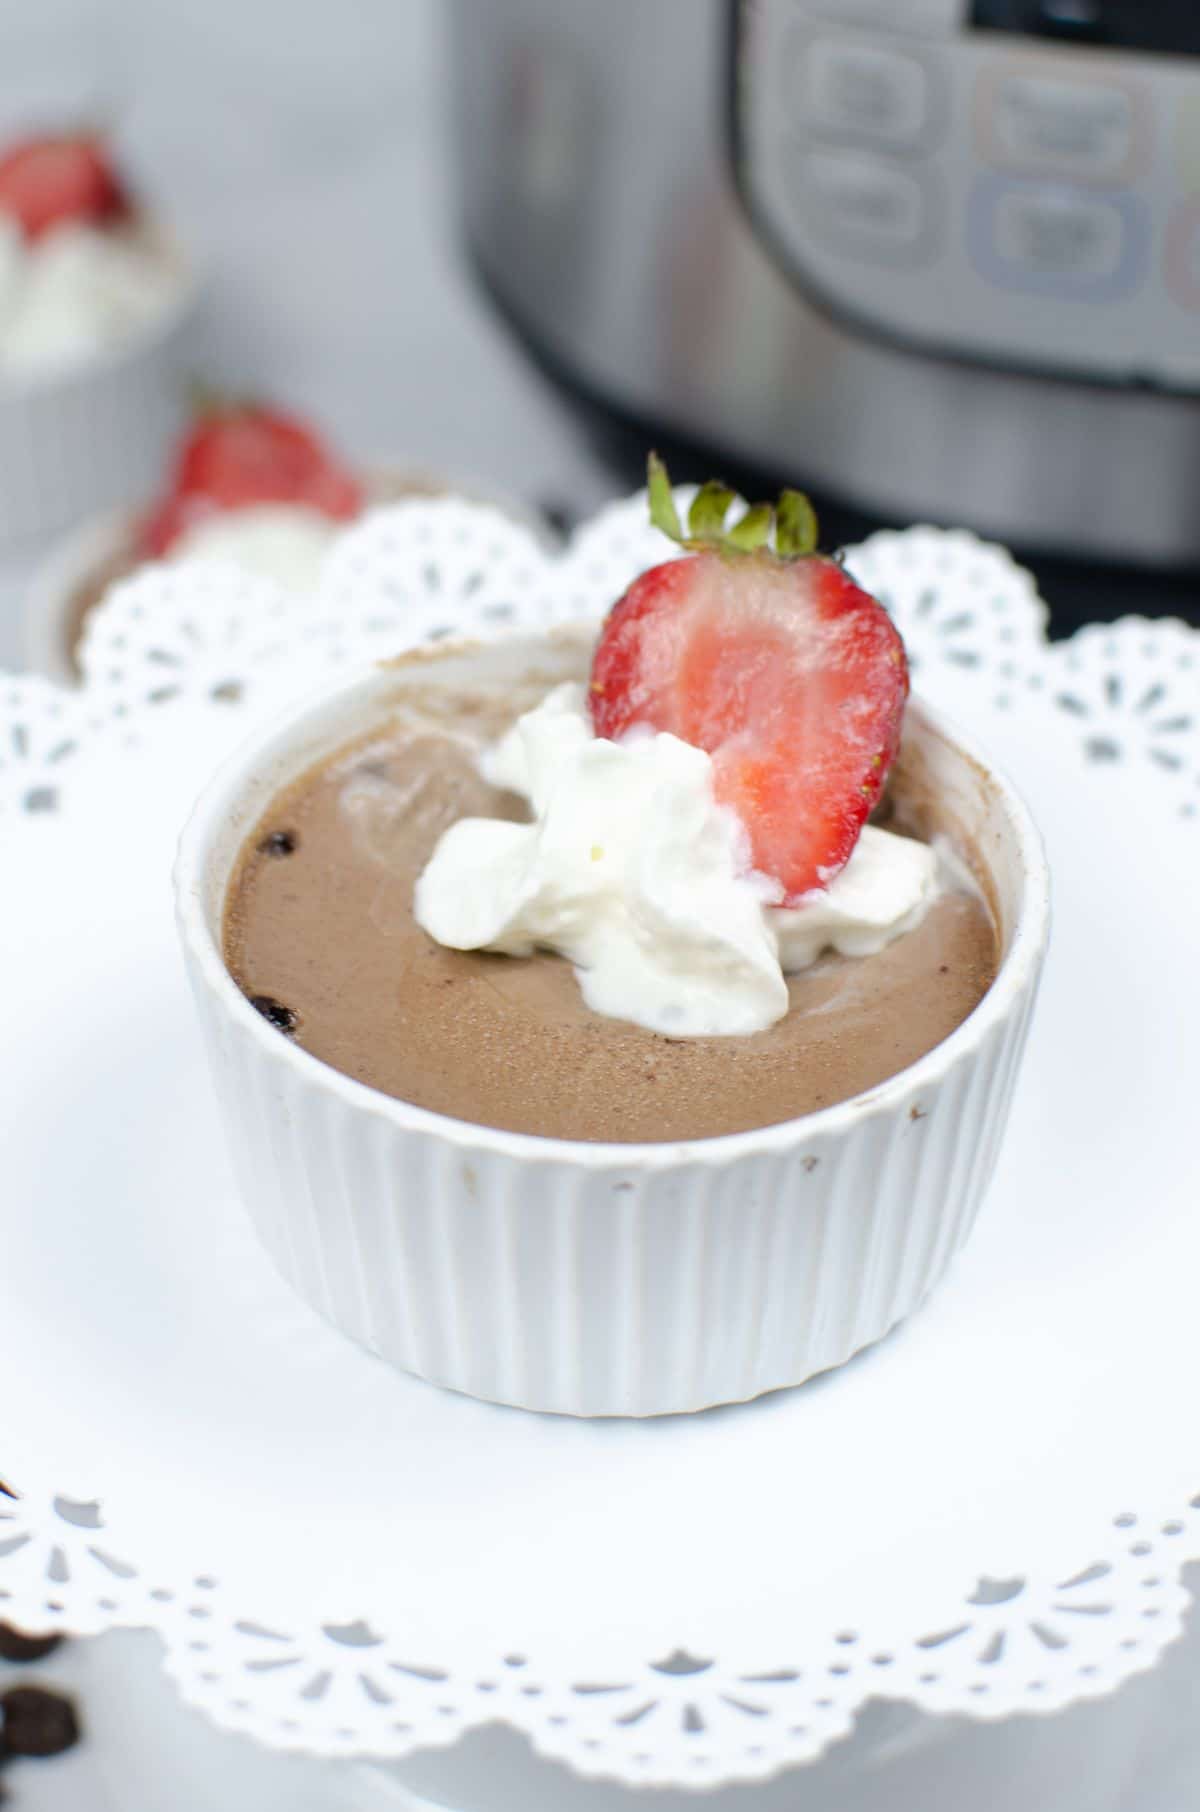 A vertical image of Instant Pot Chocolate Mousse in a white ramekin placed at the center of a white circular cake stand.